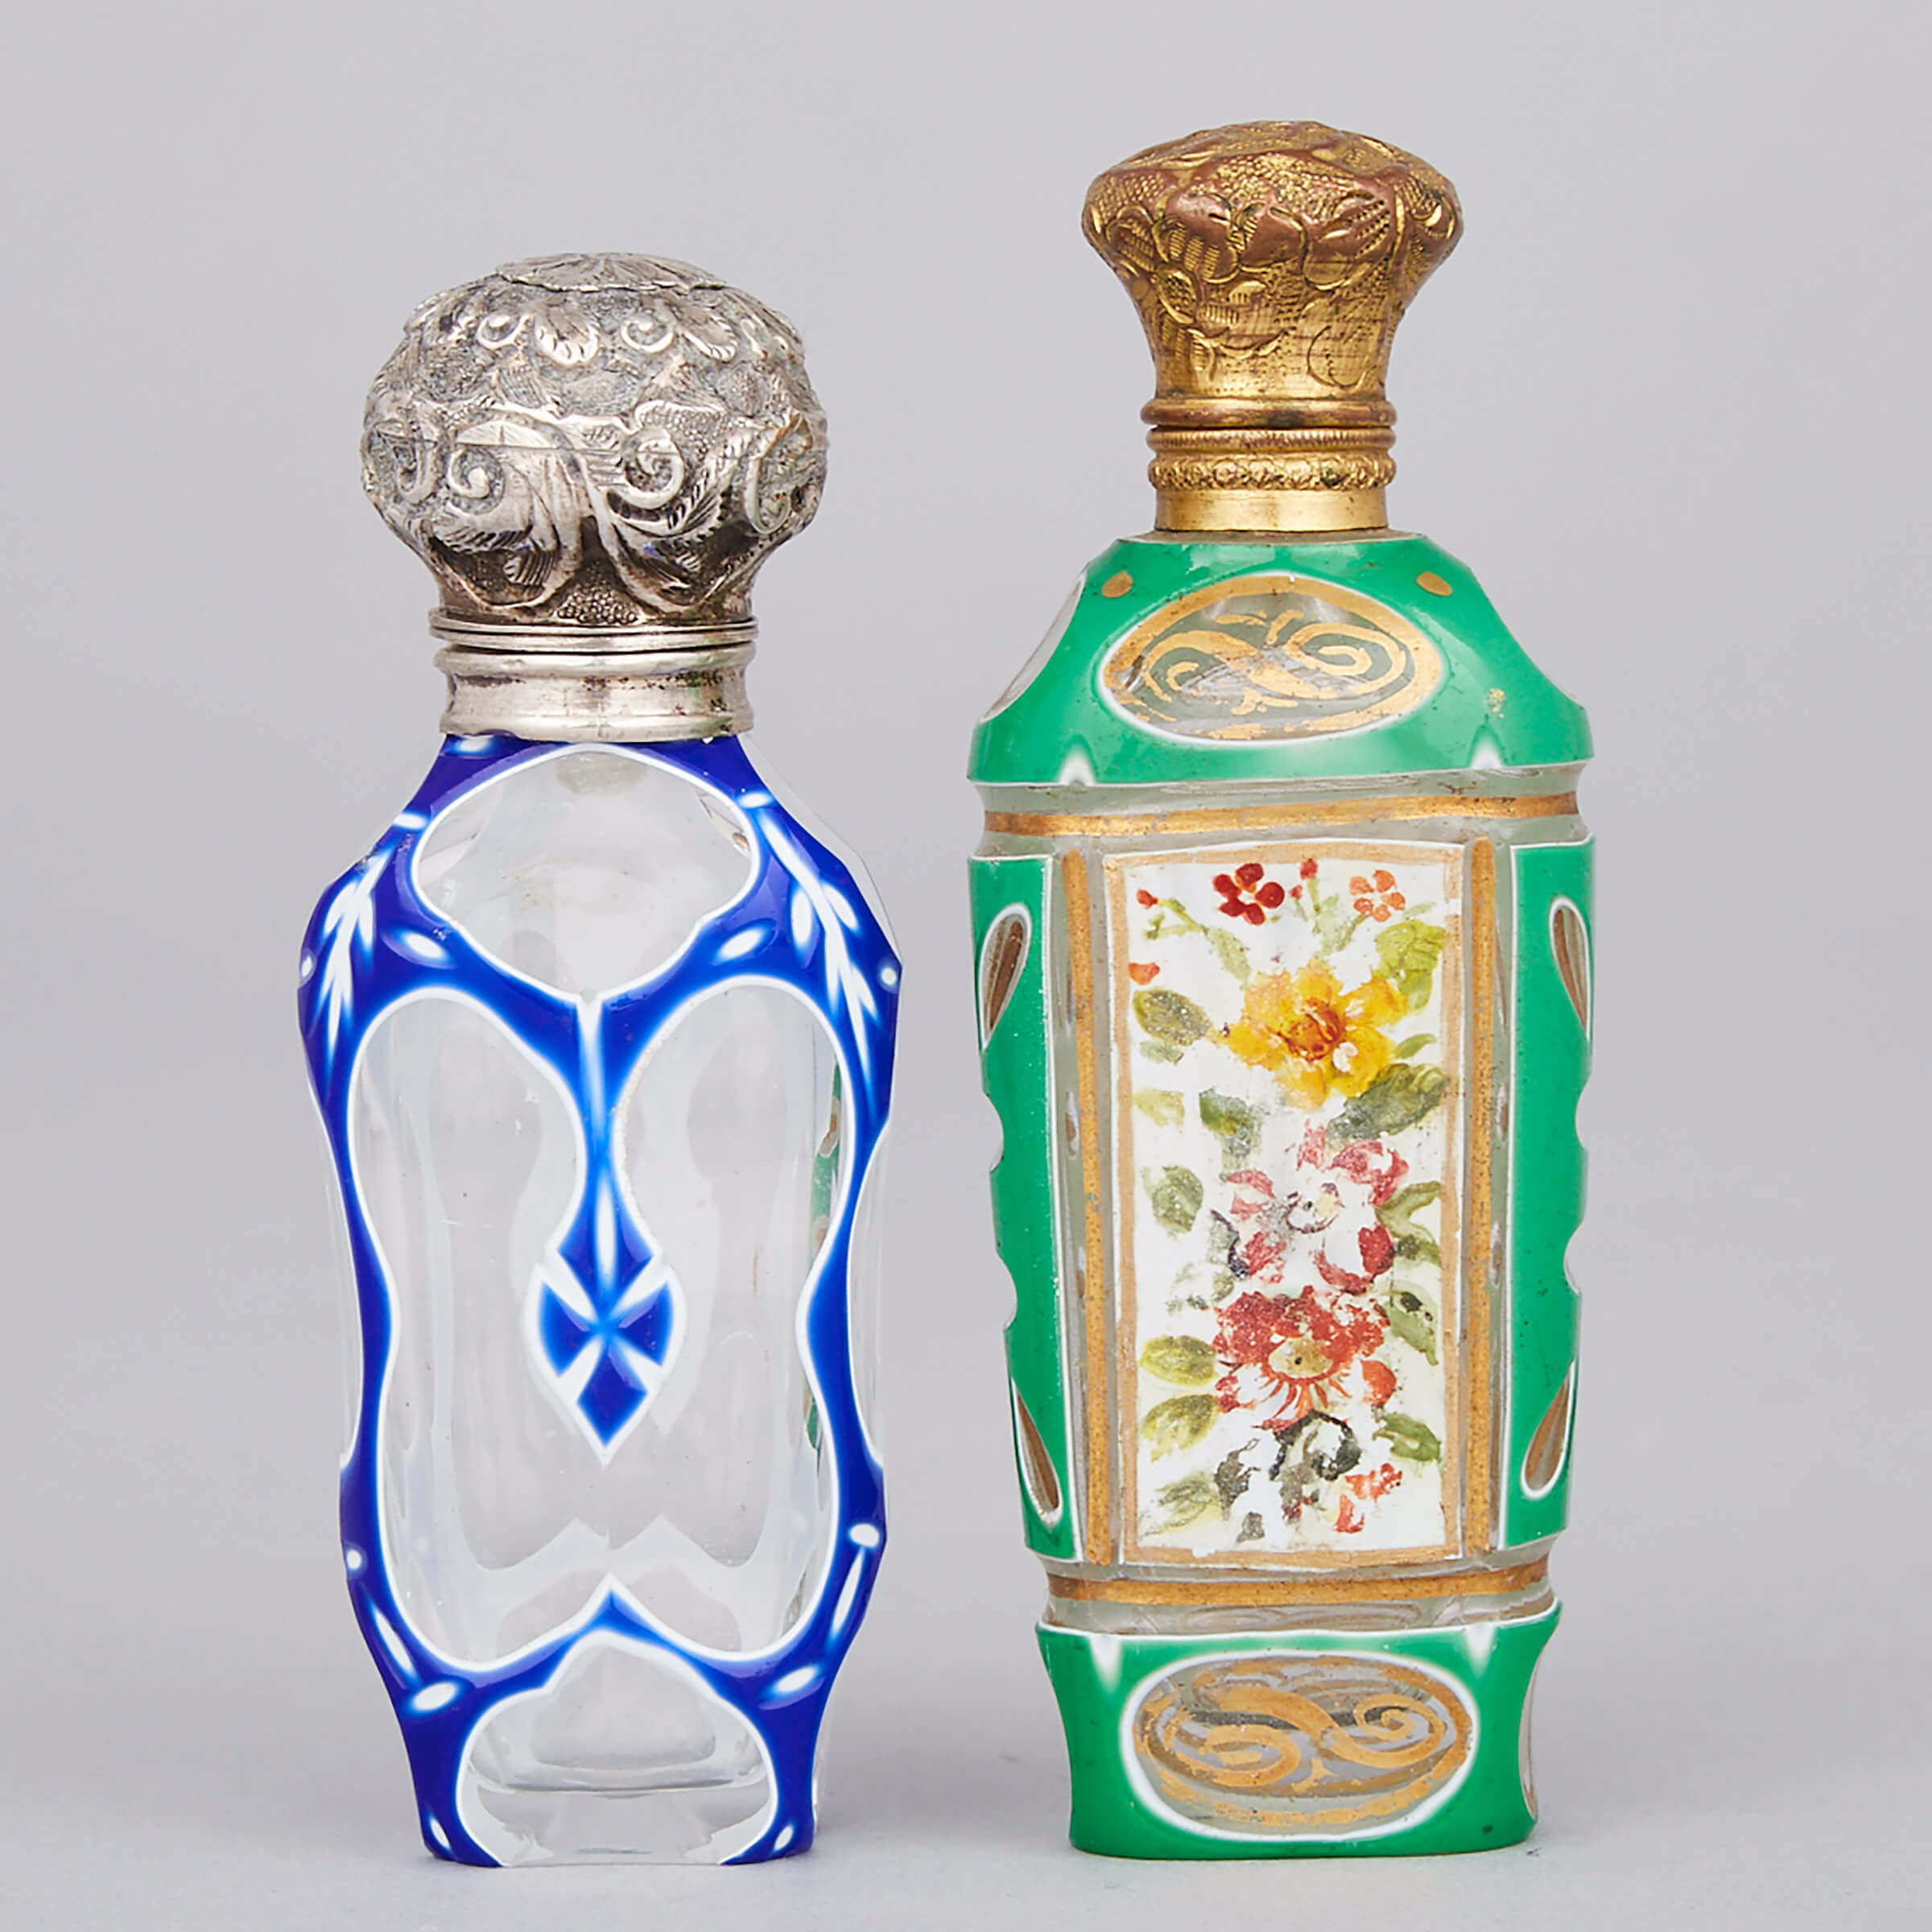 Two Silver or Metal Mounted Blue and Green Overlaid and Cut Glass Perfume Bottles, late 19th century